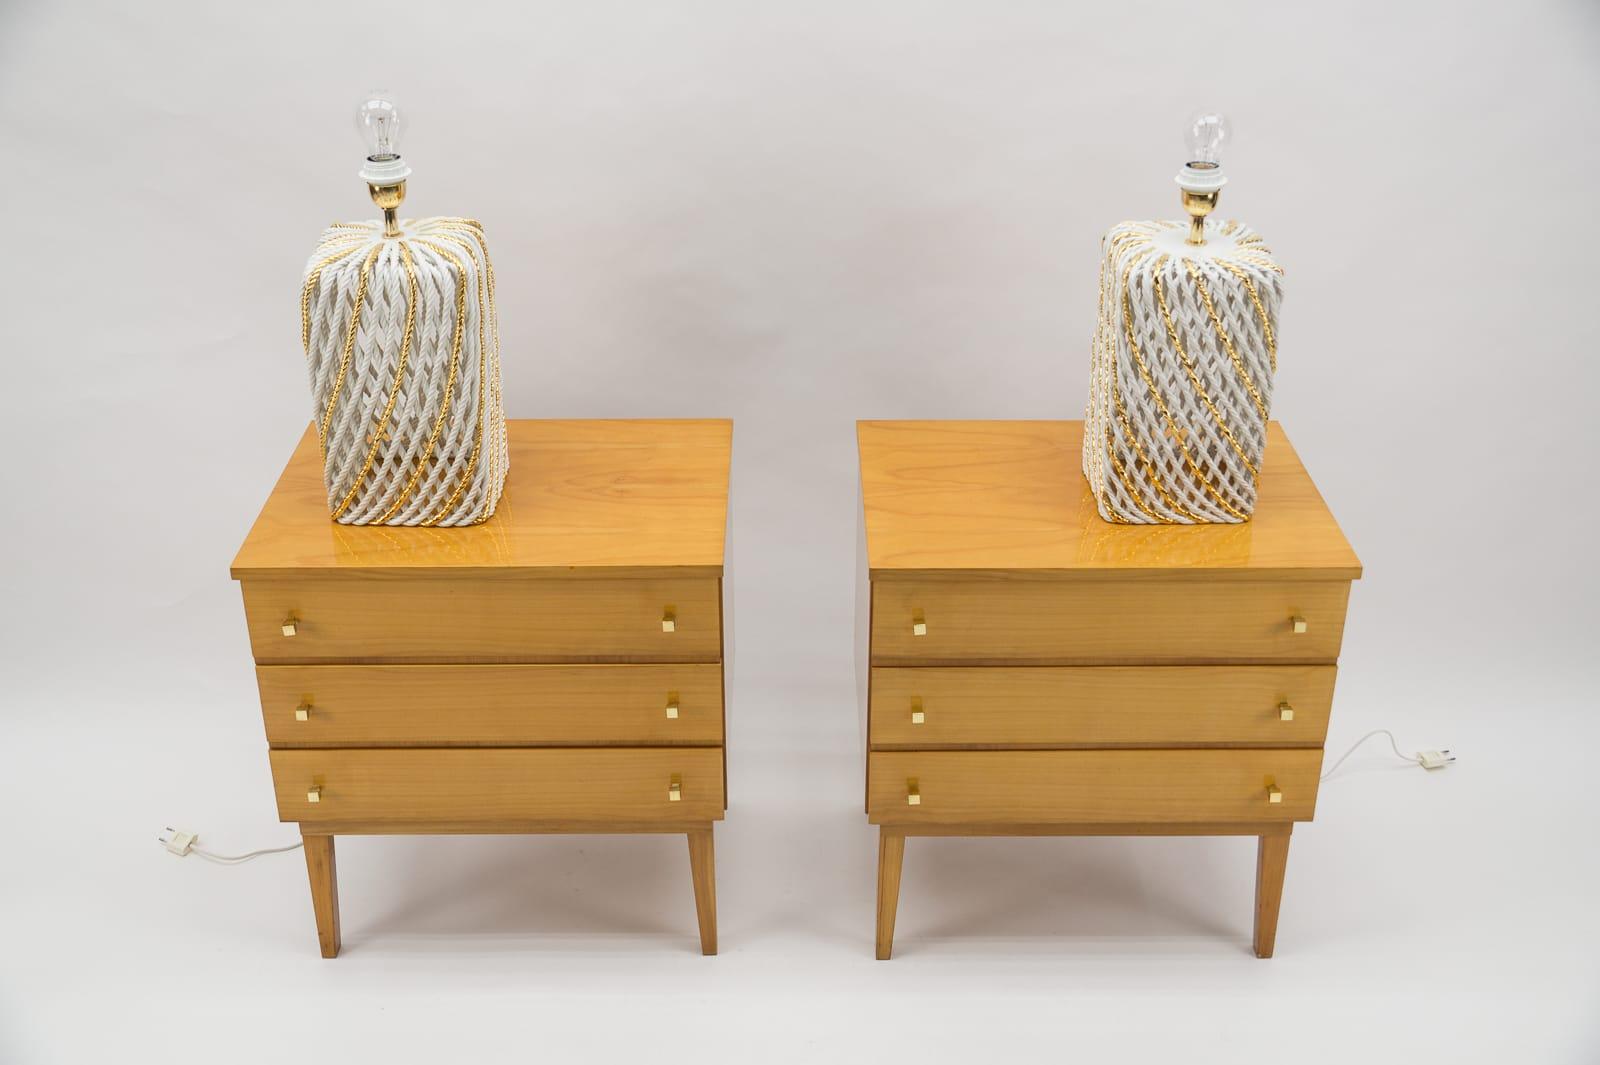  Mid-Century Modern Brass and Wood Nightstands, 1950s, Set of 2 For Sale 6